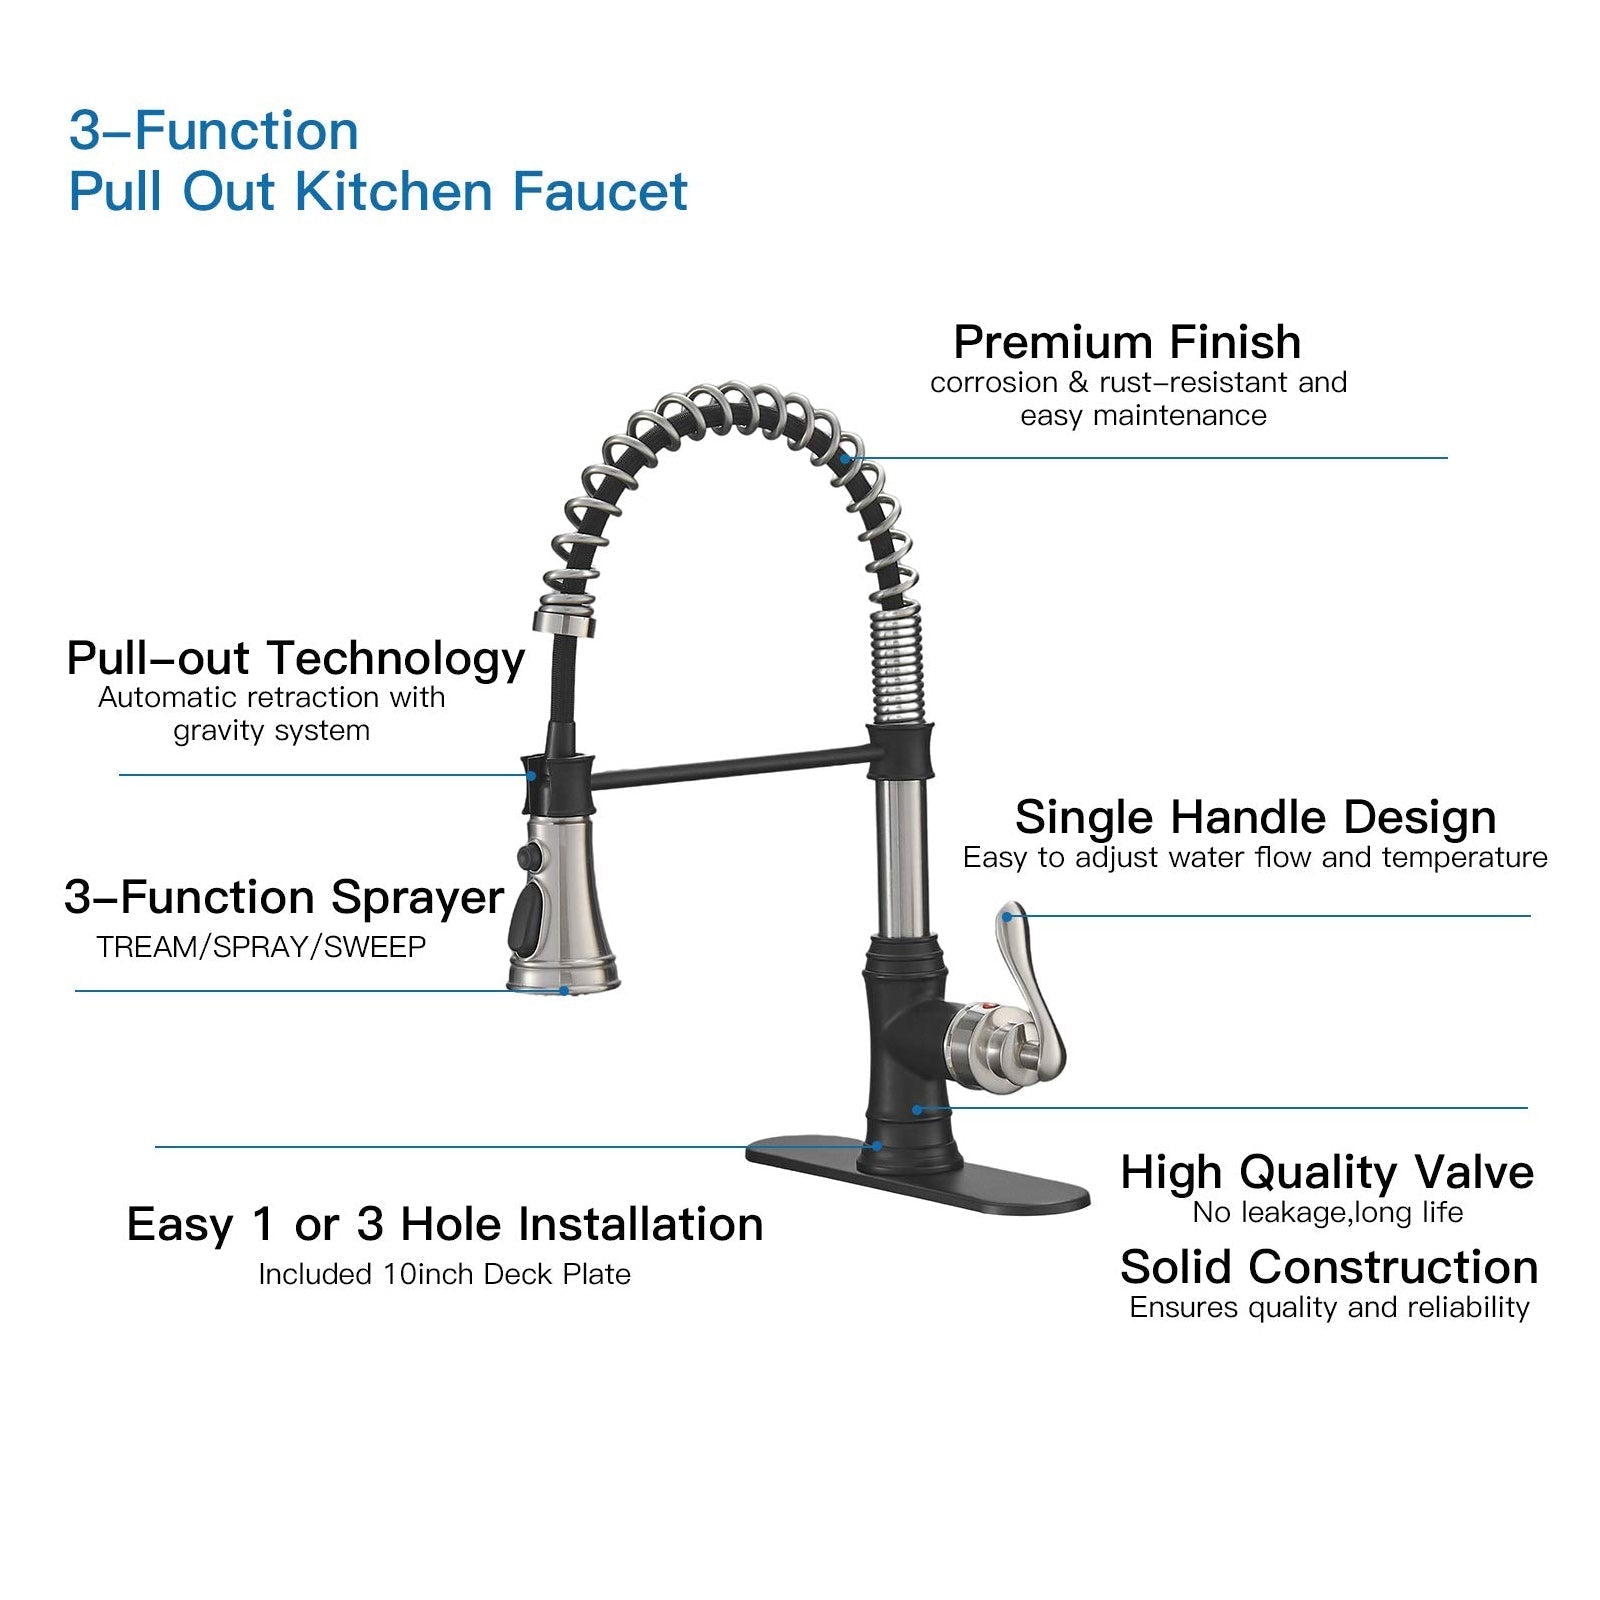 Pull-Down Sprayer 3 Spray Kitchen Faucet Brushed Bronze - buyfaucet.com